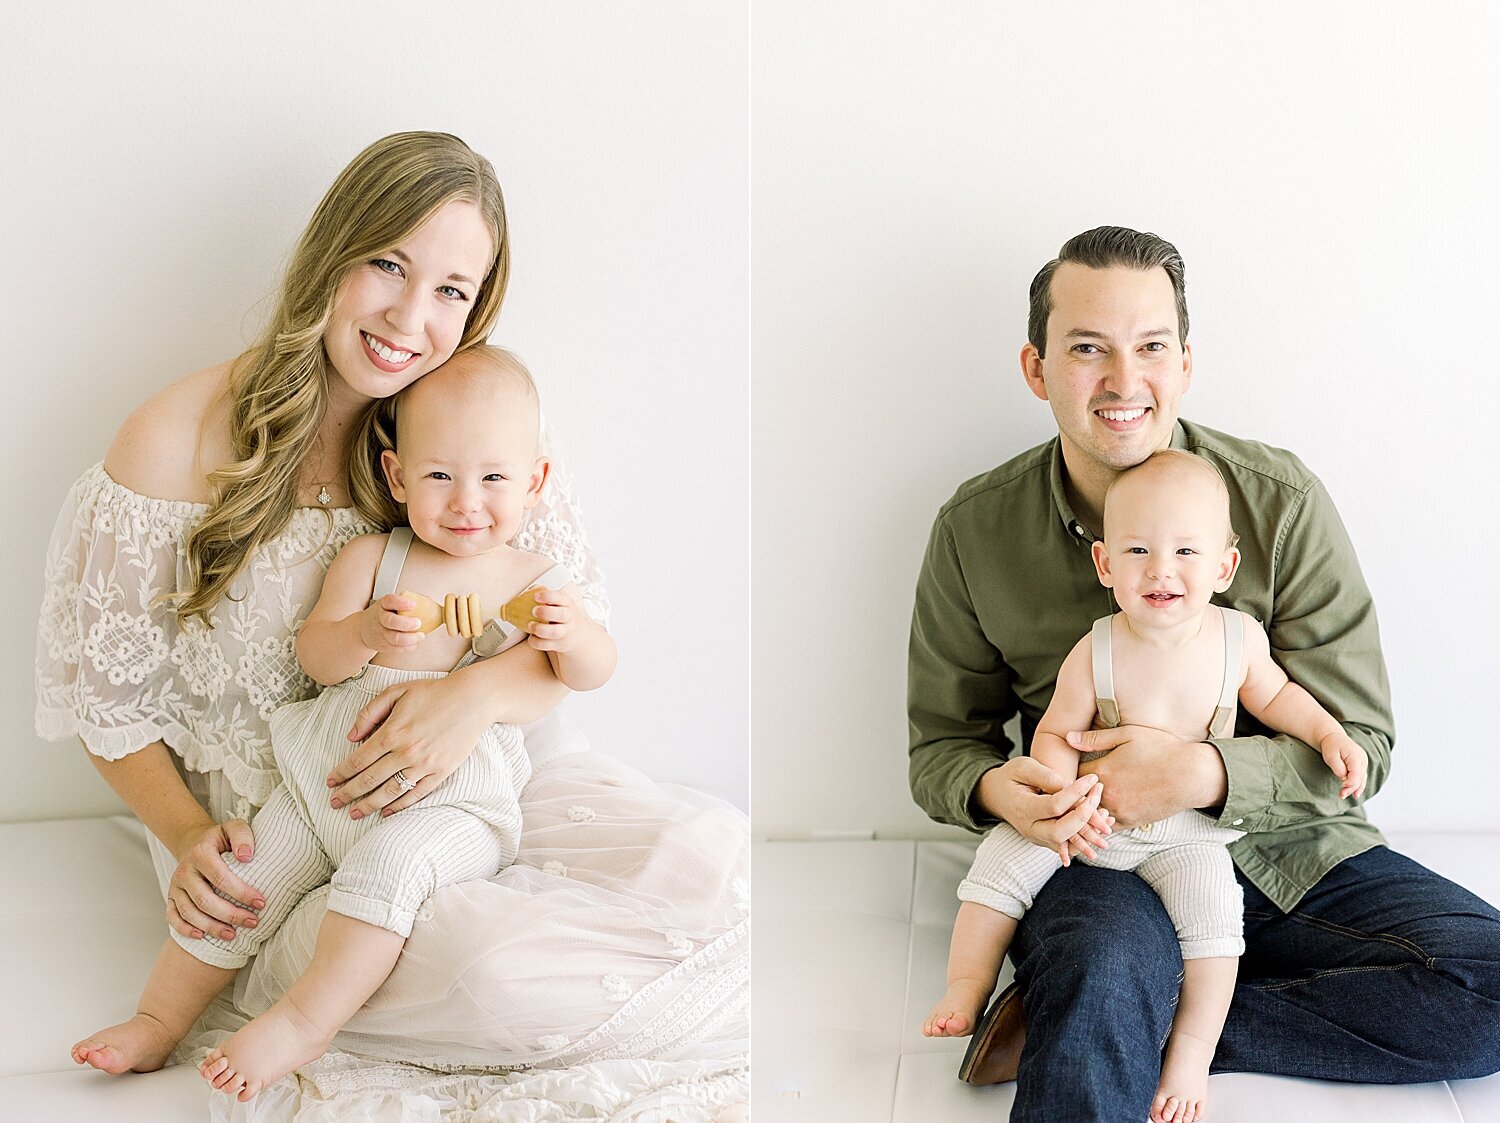 Family portrait with Mom, Dad and one-year-old son. Photo by Ambre Williams Photography.